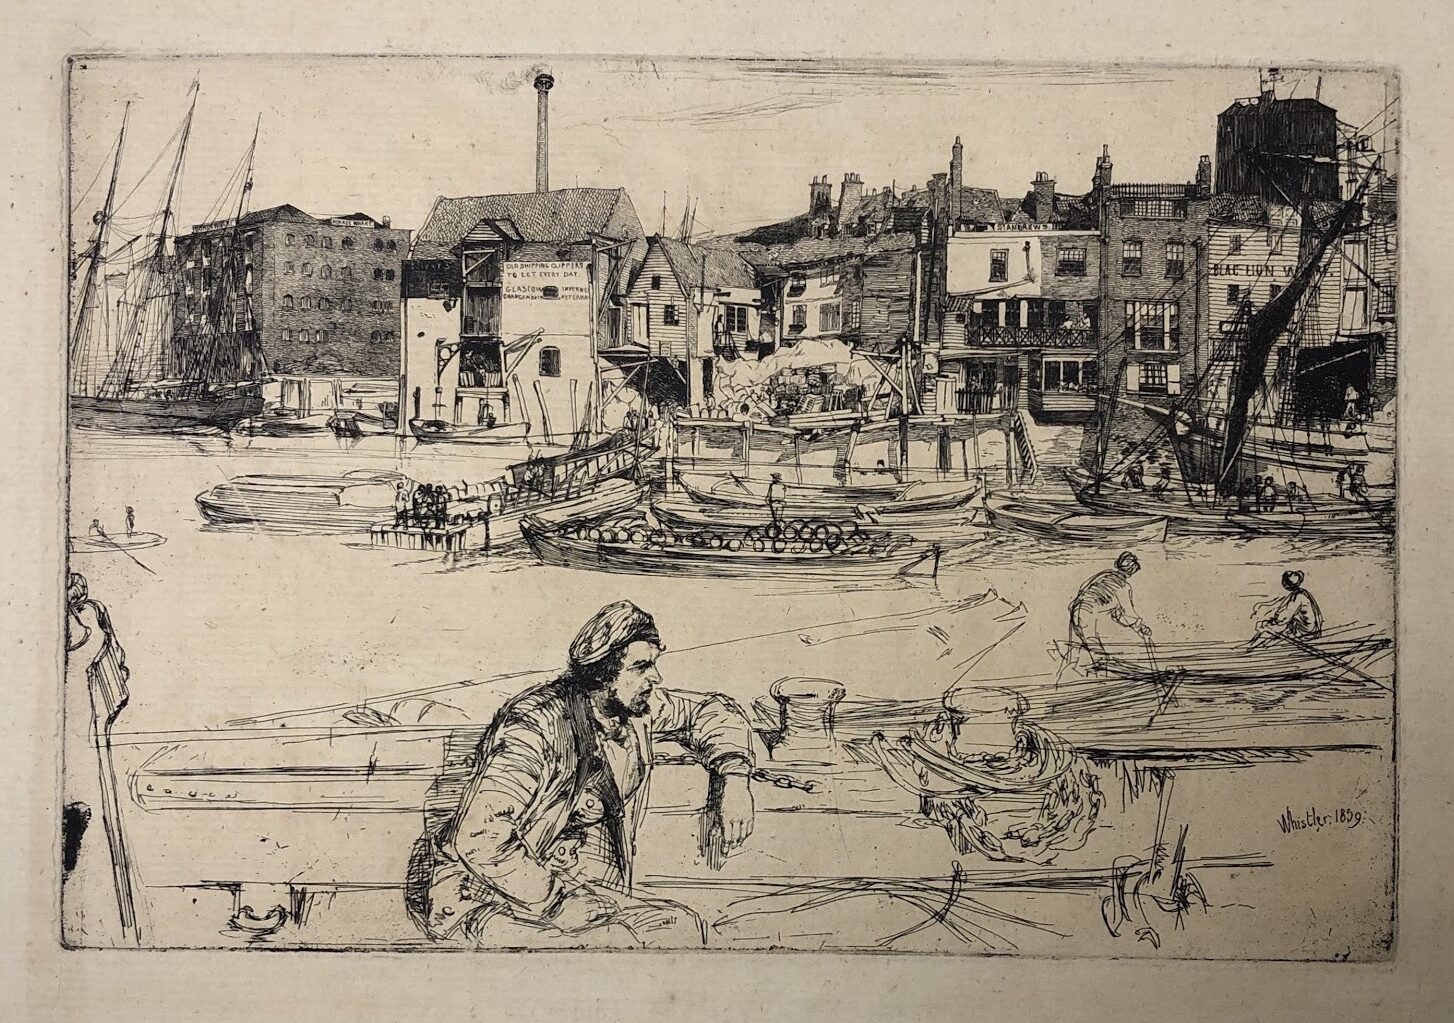 James McNeill Whistler (American, 1834–1903). Black Lion Wharf, 1859. Etching on paper. Special Collections, A. J. Rosenfeld Etchings Collection.